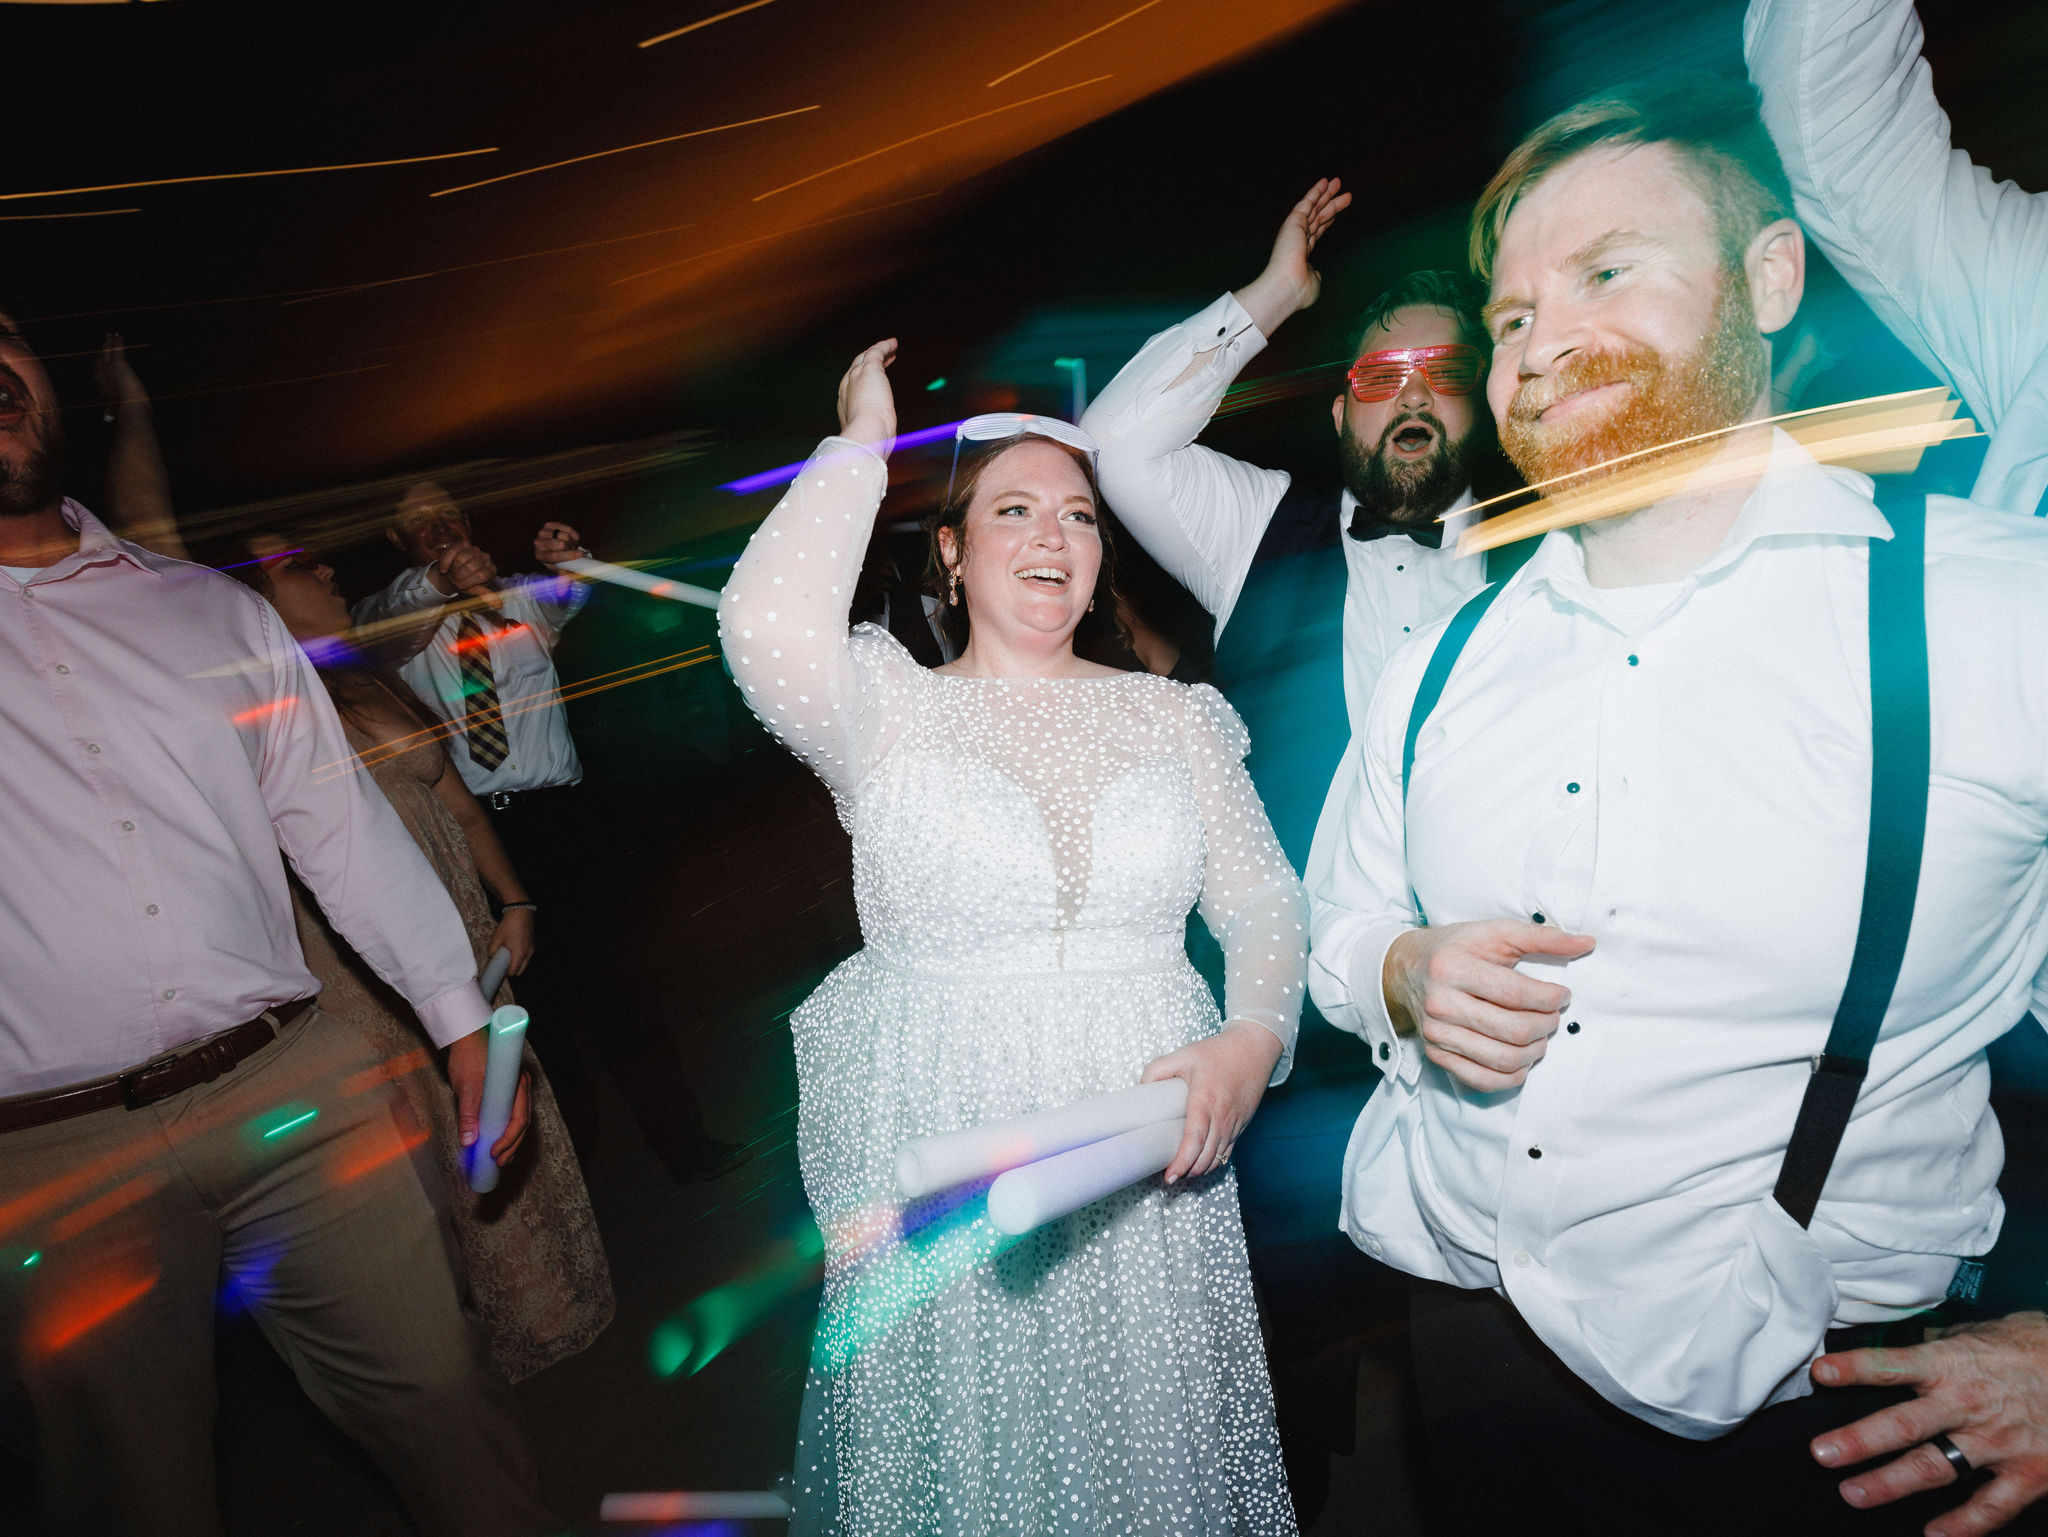 Katie and Bobby hit the dance floor with glow sticks at their wedding